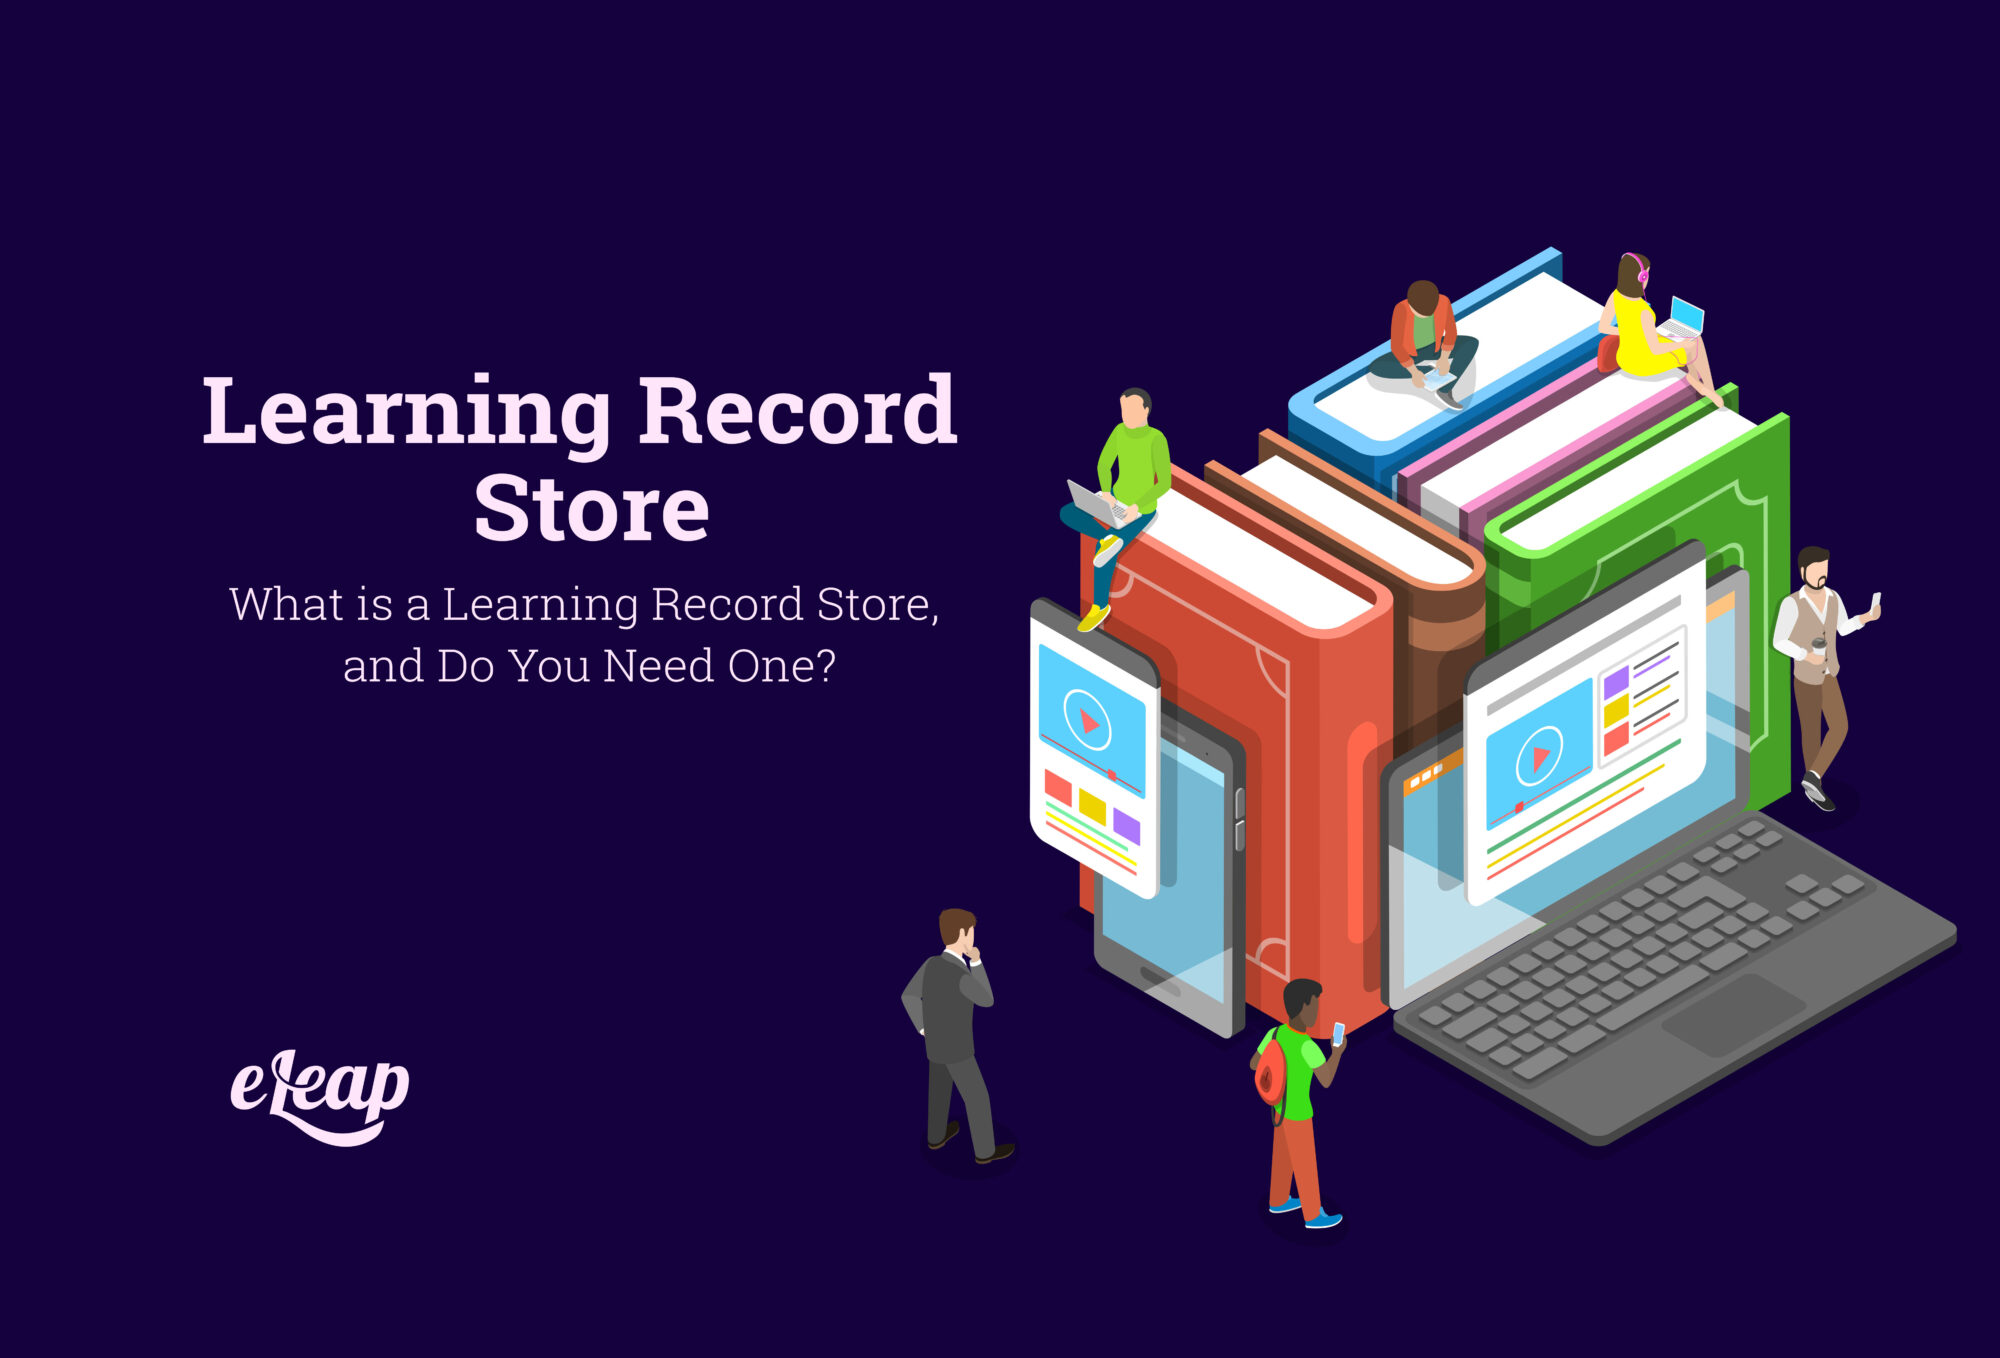 What is a Learning Record Store, and Do You Need One?